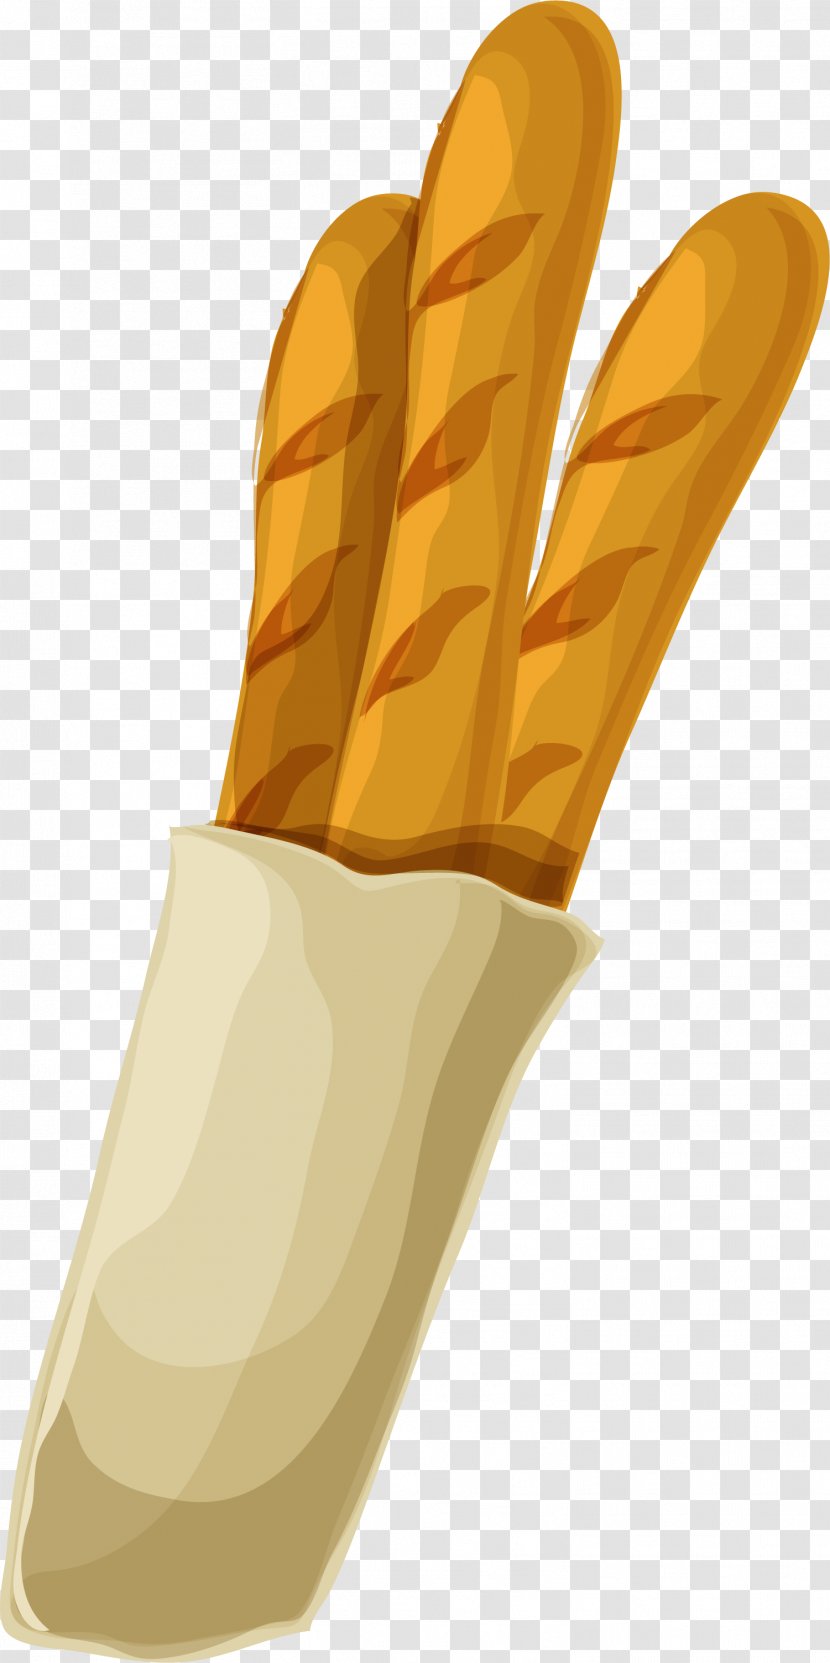 Baguette Bread Loaf - Hand Painted Yellow Transparent PNG